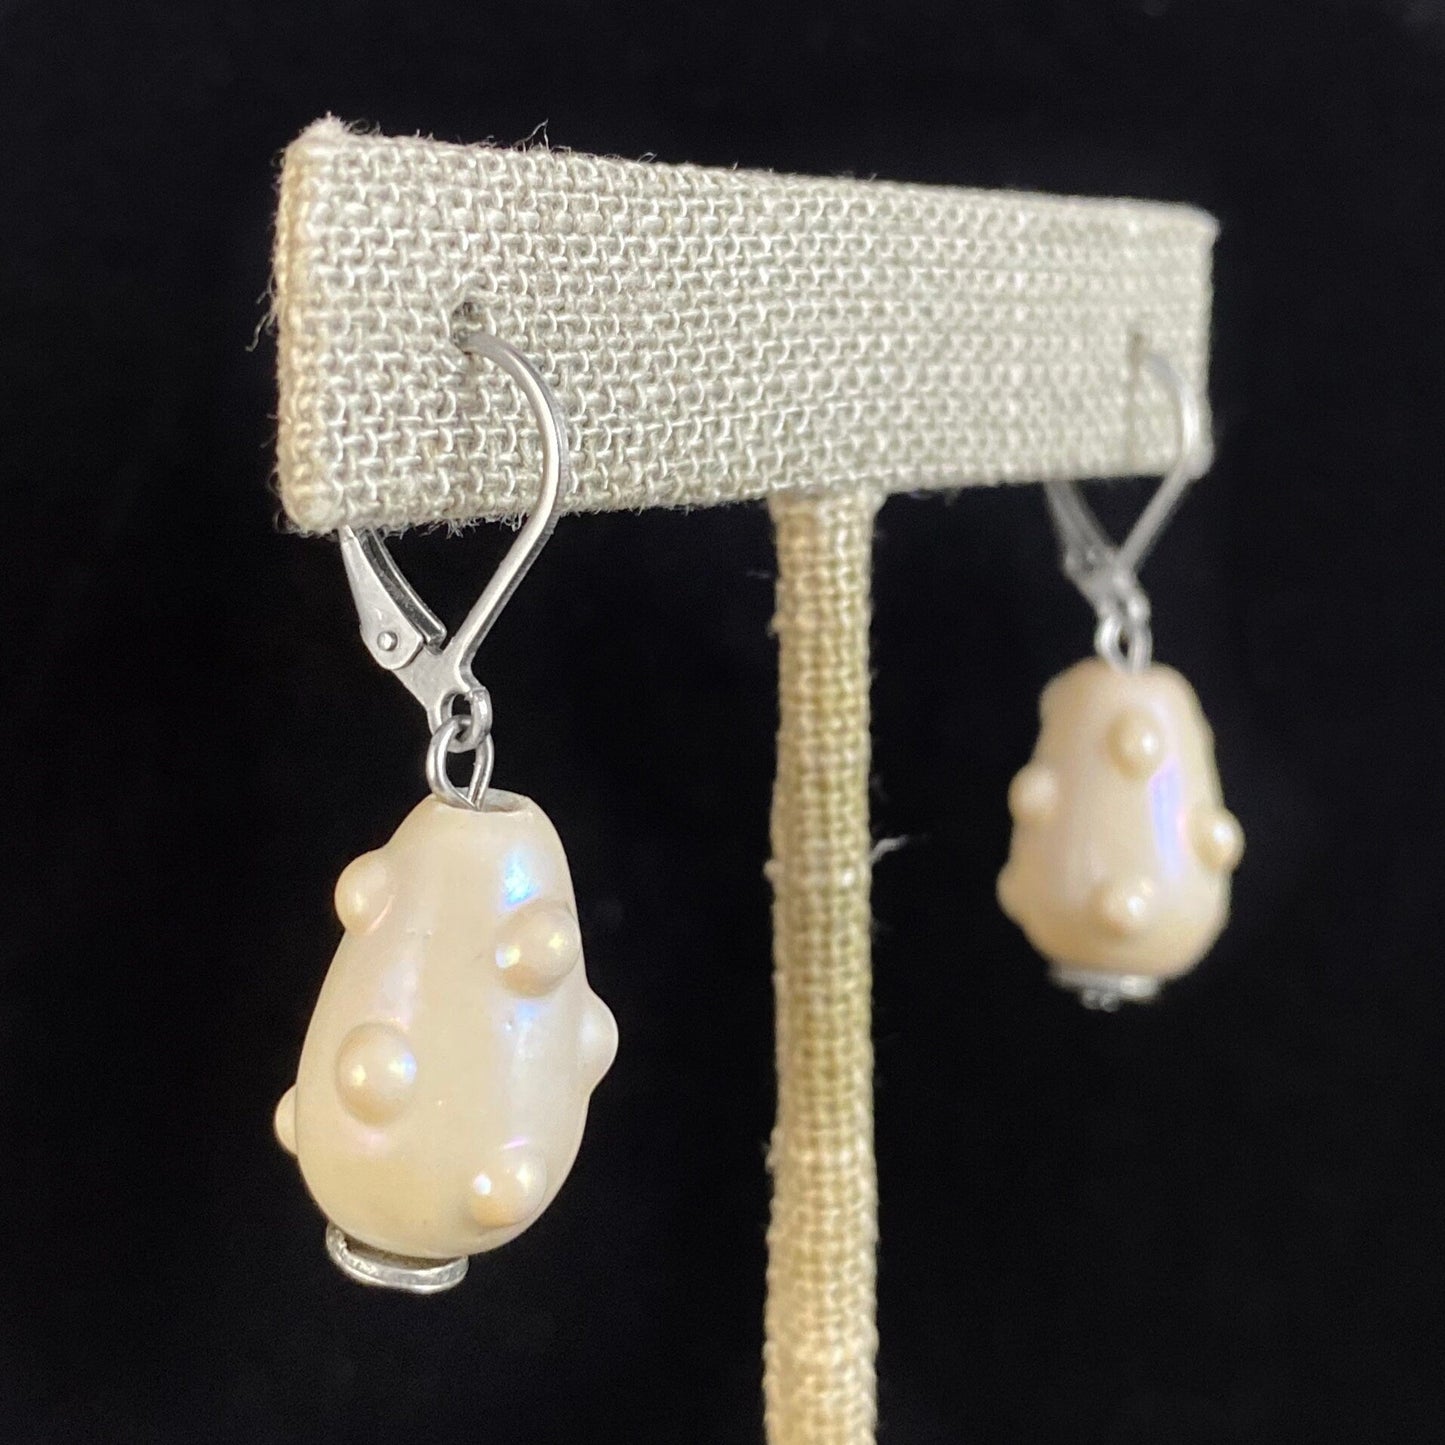 Unique Textured Oval Bead Earrings - Handmade in Canada, Anne-Marie Chagnon Jewelry